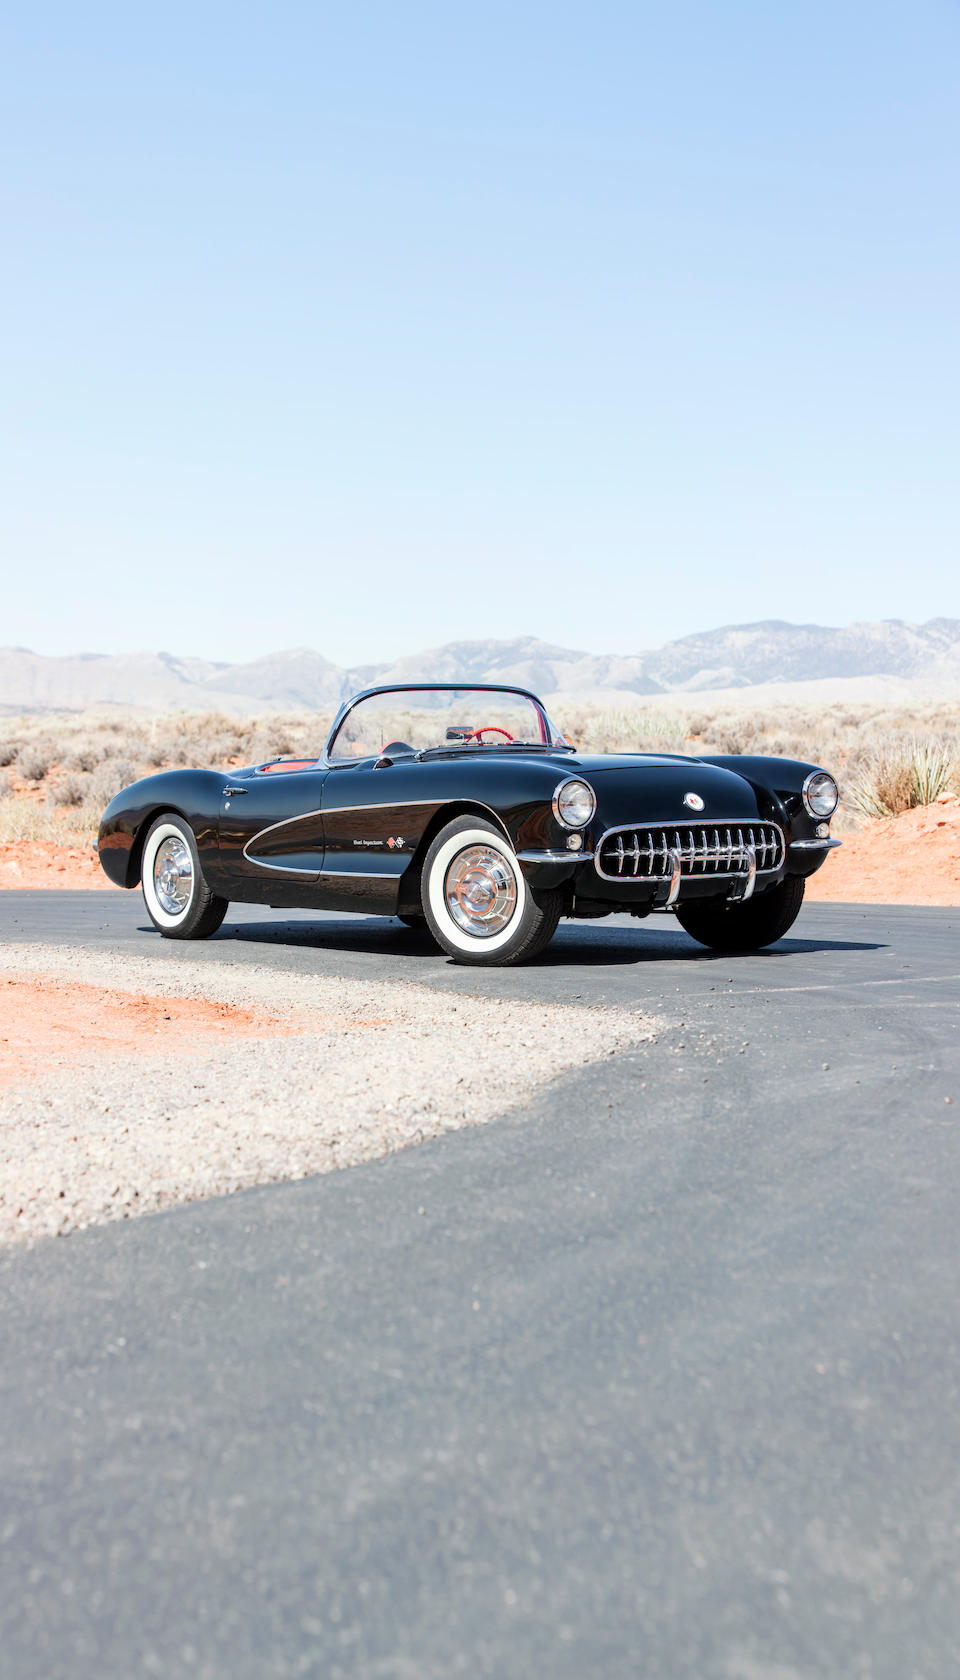 <b>1957 Chevrolet Corvette Fuel Injected Roadster</b><br />Chassis no. E57S103654<br />Engine no. F328EN